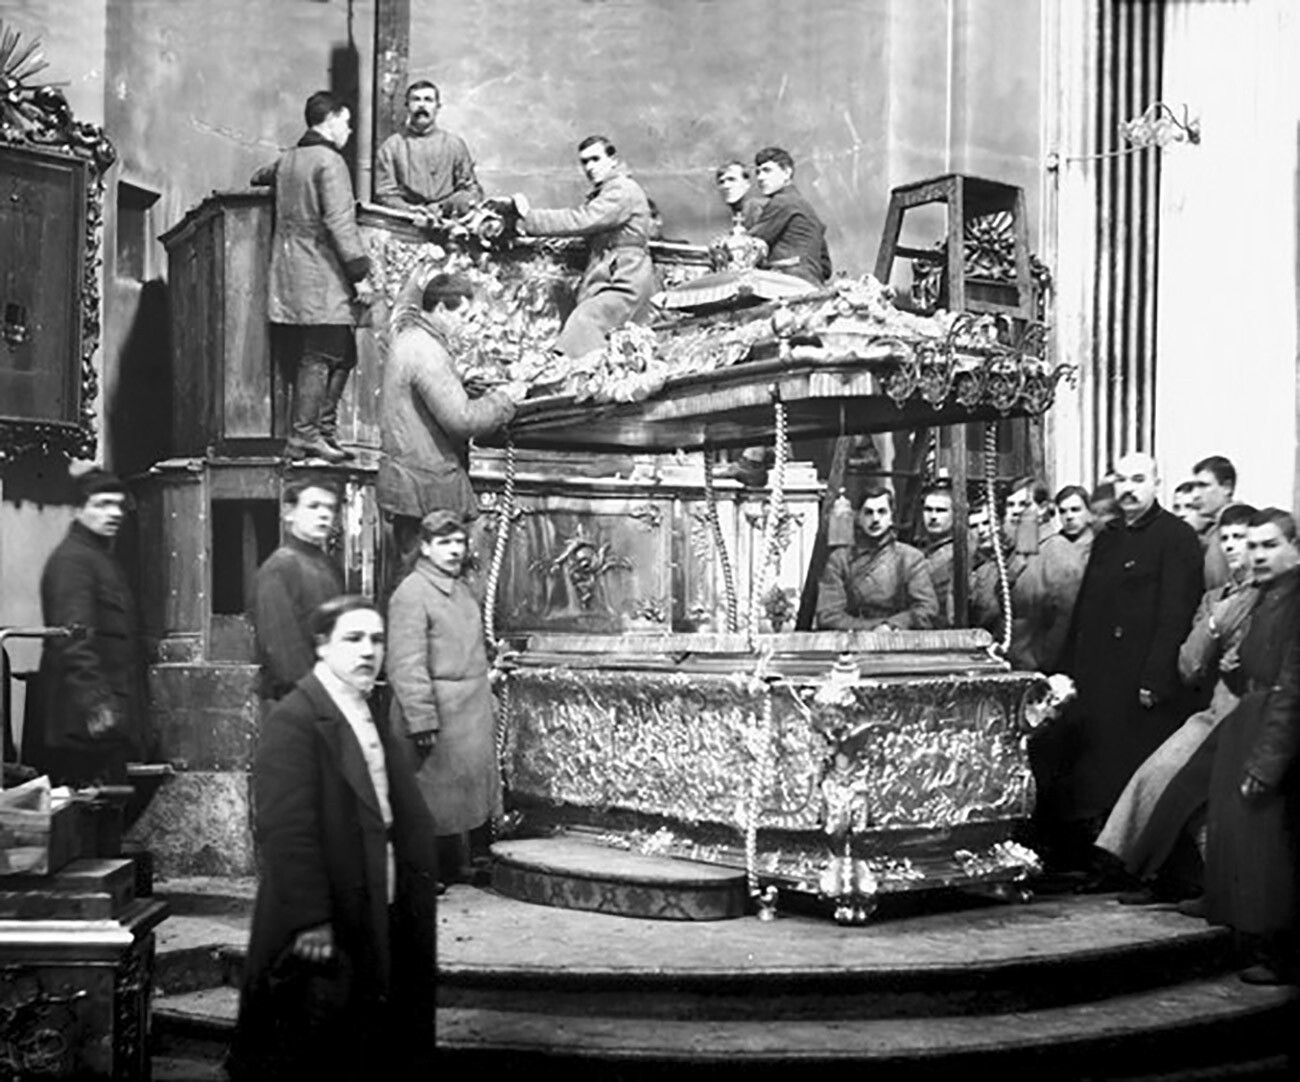 Dismantling the headboard of the shrine in 1922